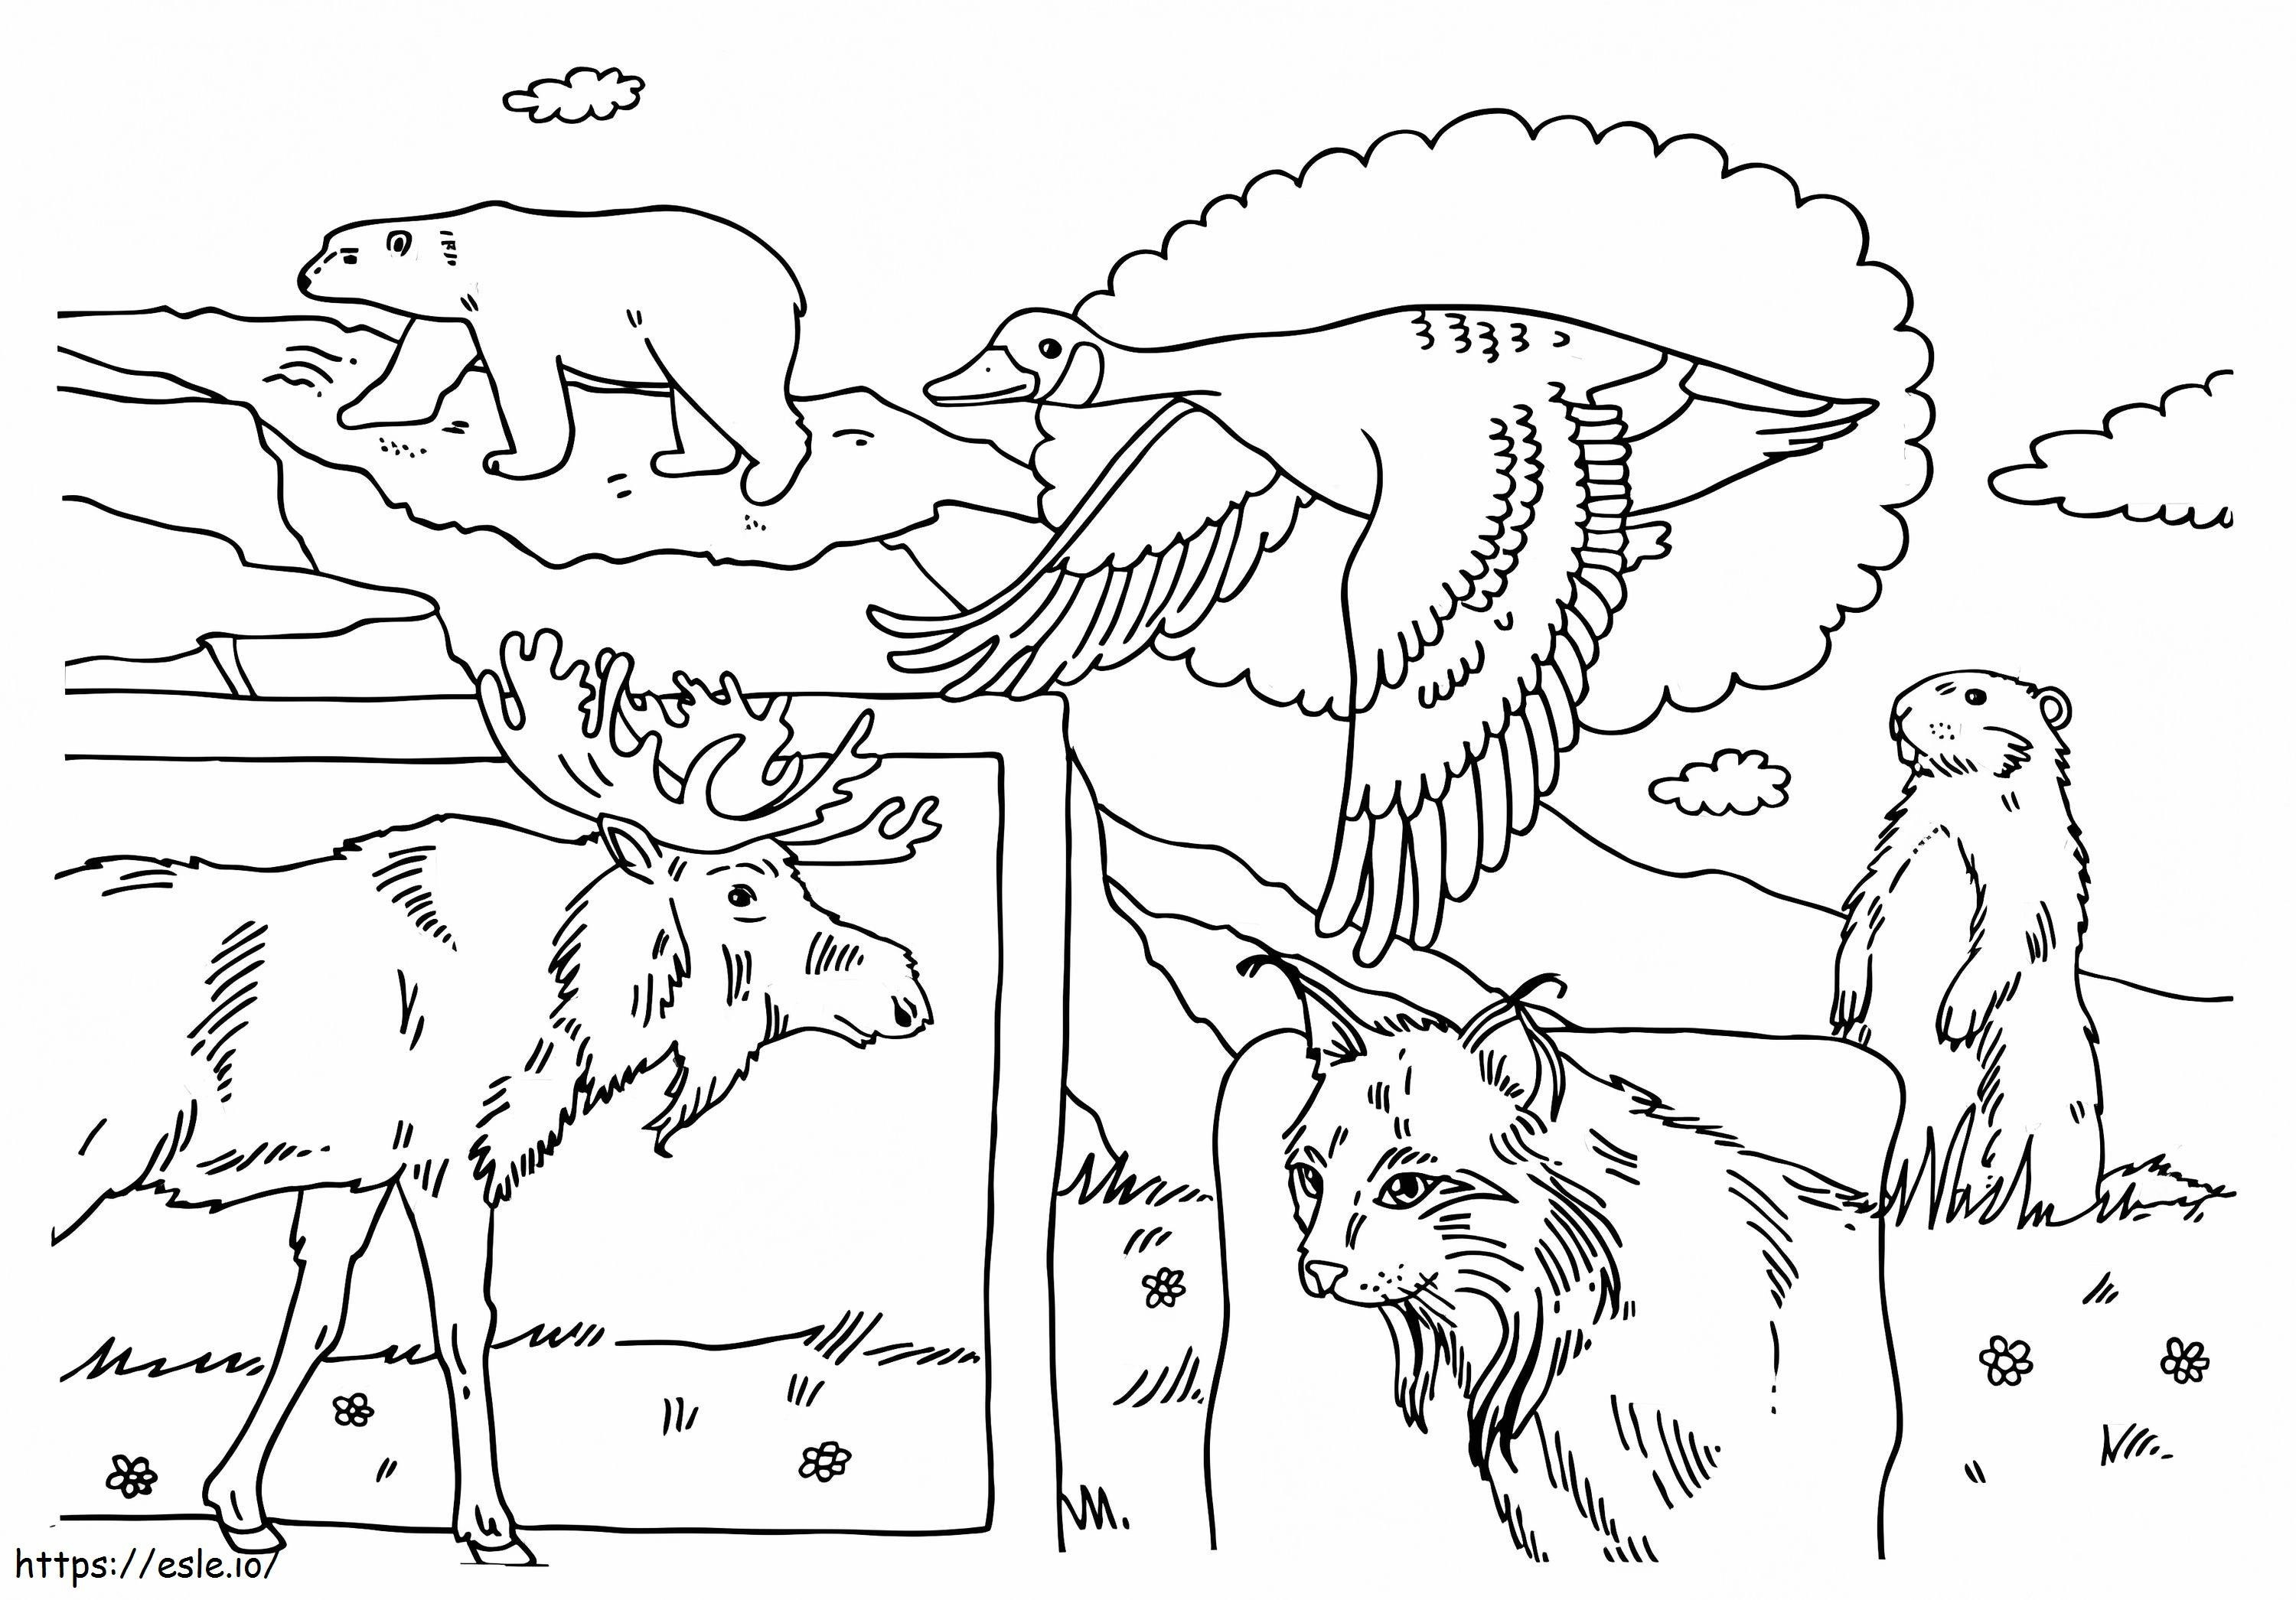 Canadian Animals coloring page